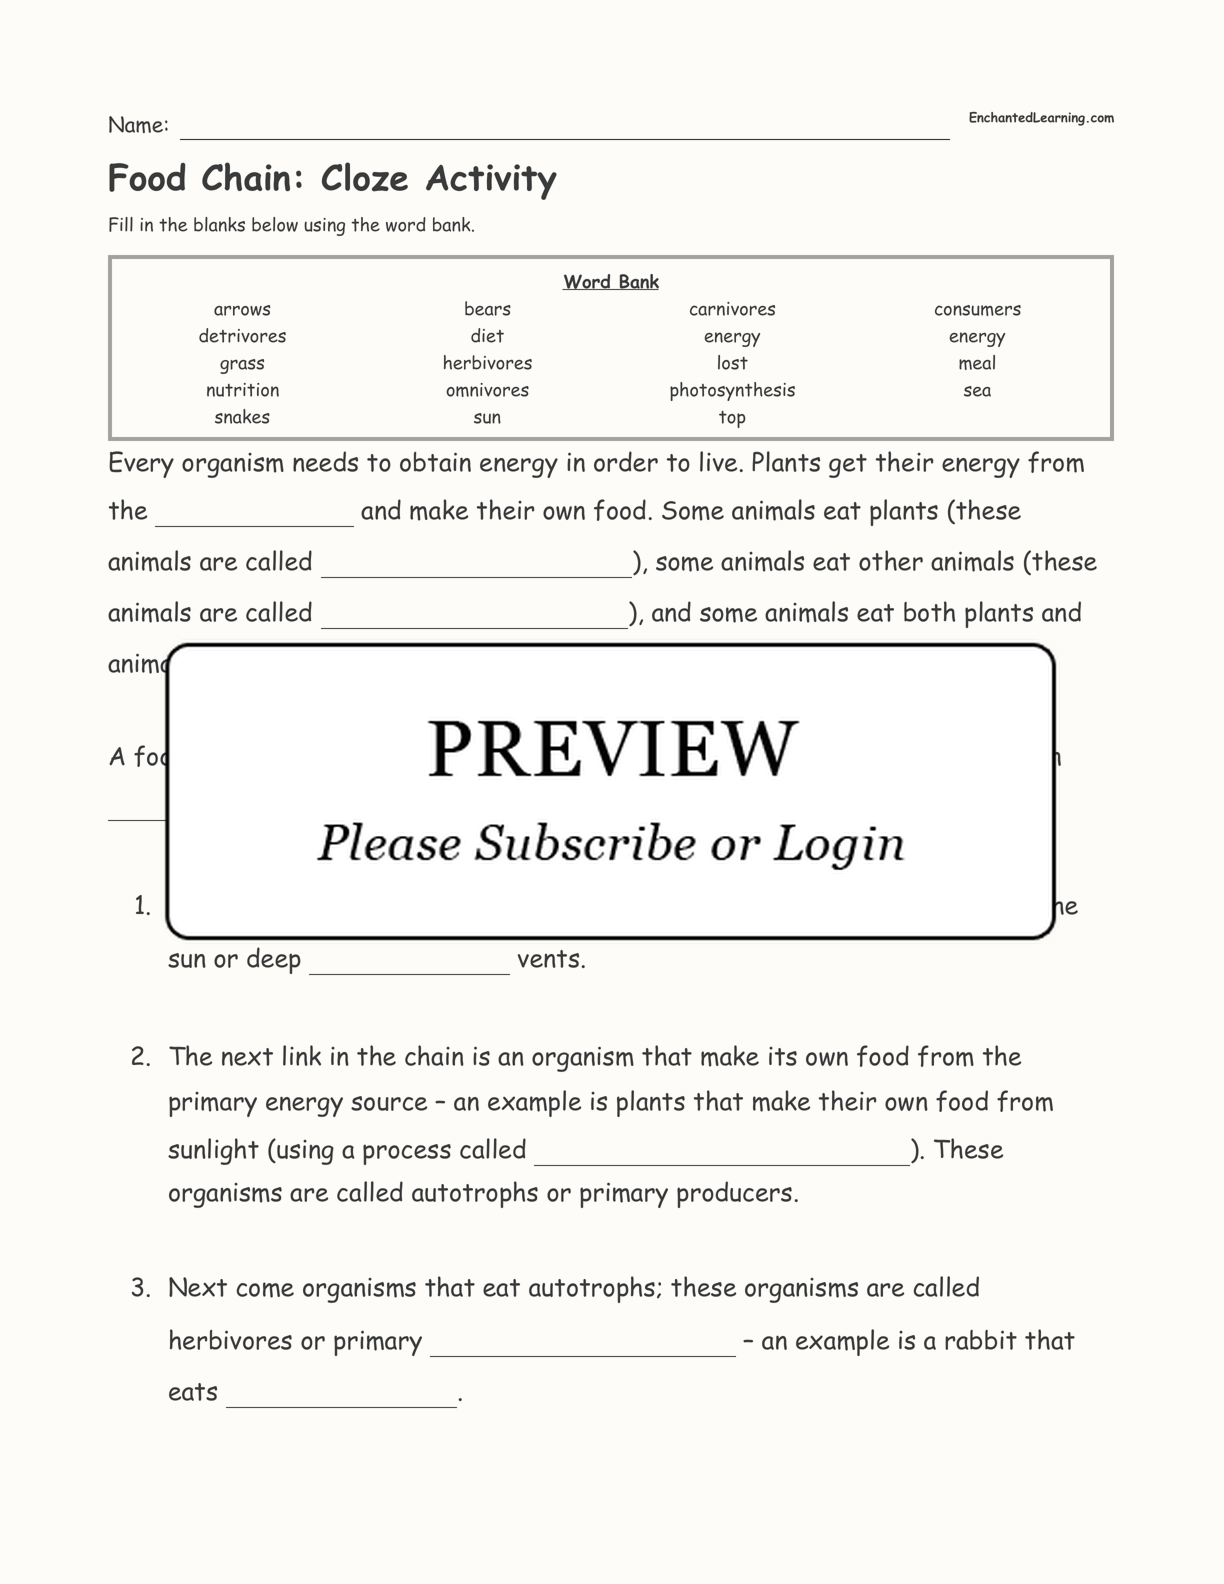 Food Chain: Cloze Activity interactive worksheet page 1